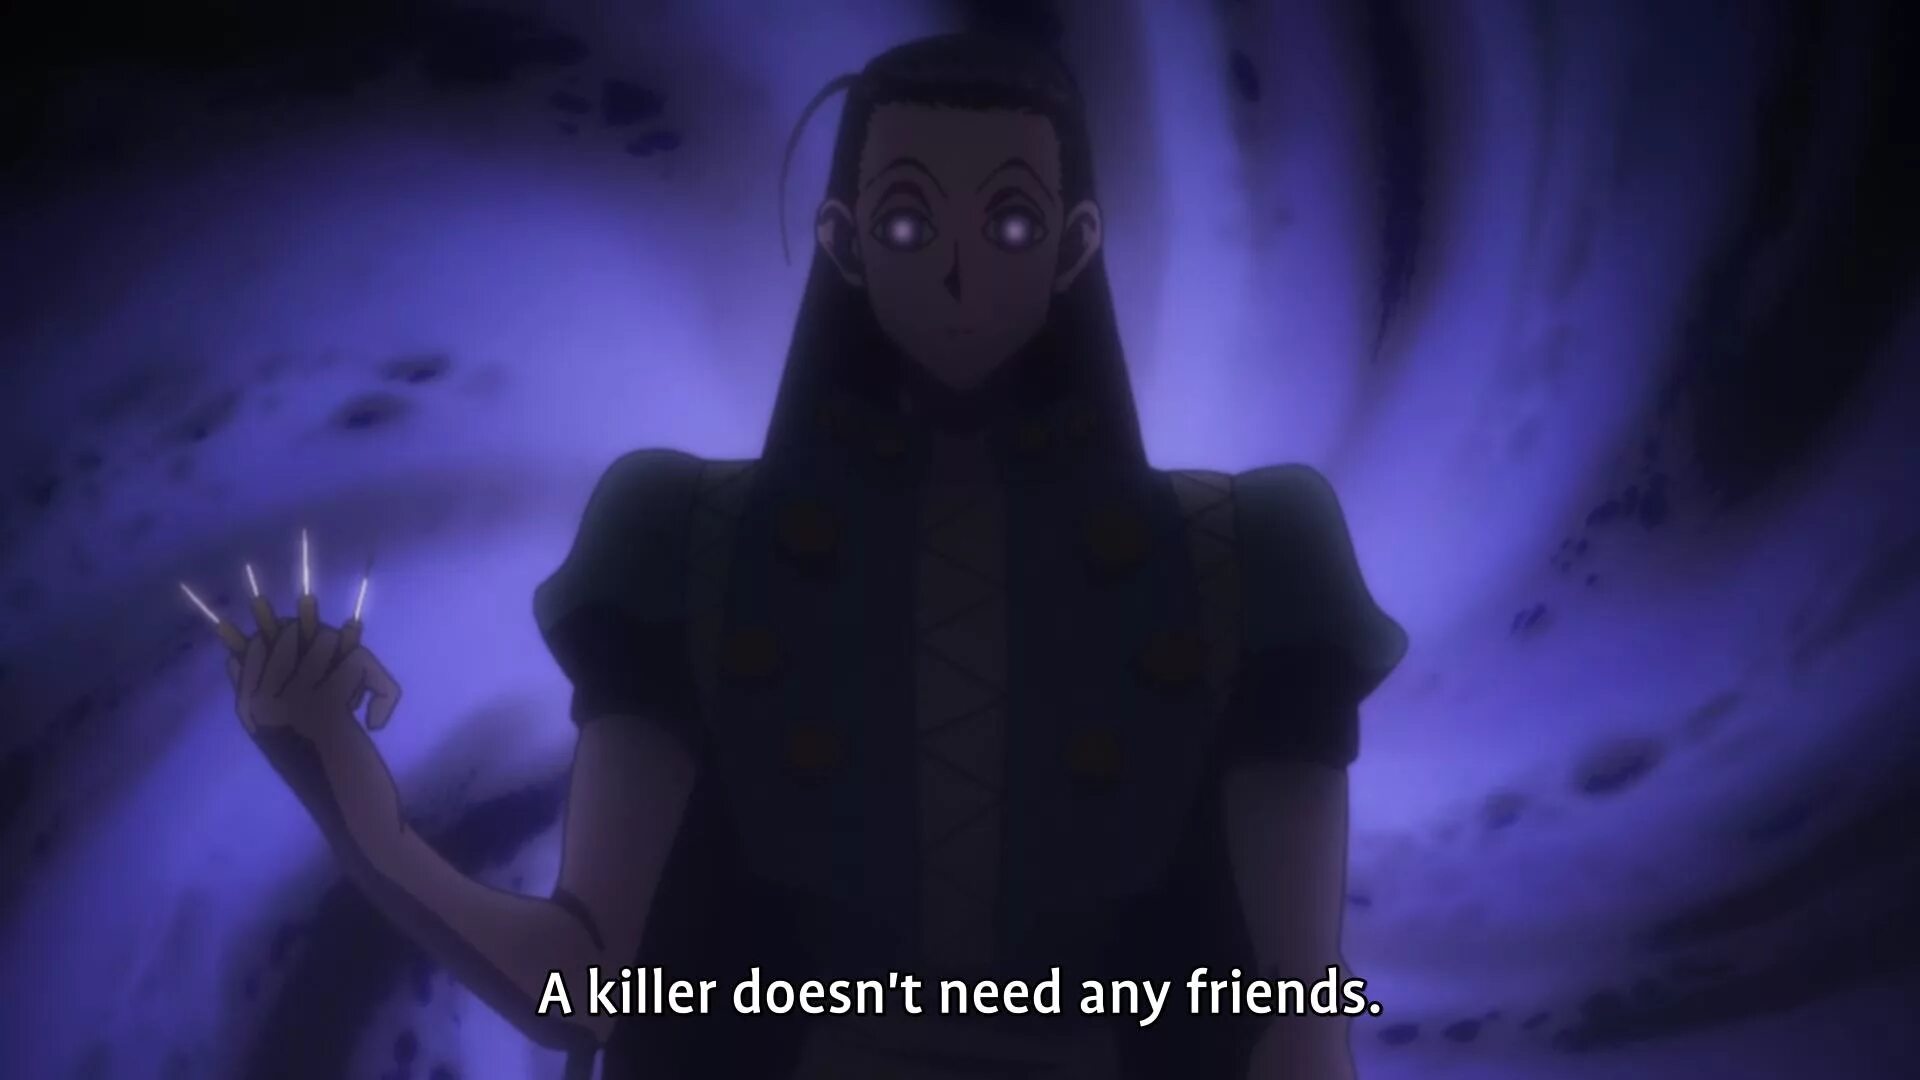 Need more friends the hunt. HXH Иллуми. Хантер х Хантер 1999 Иллуми. Иллуми Золдик злой. Иллуми Золдик Аура.